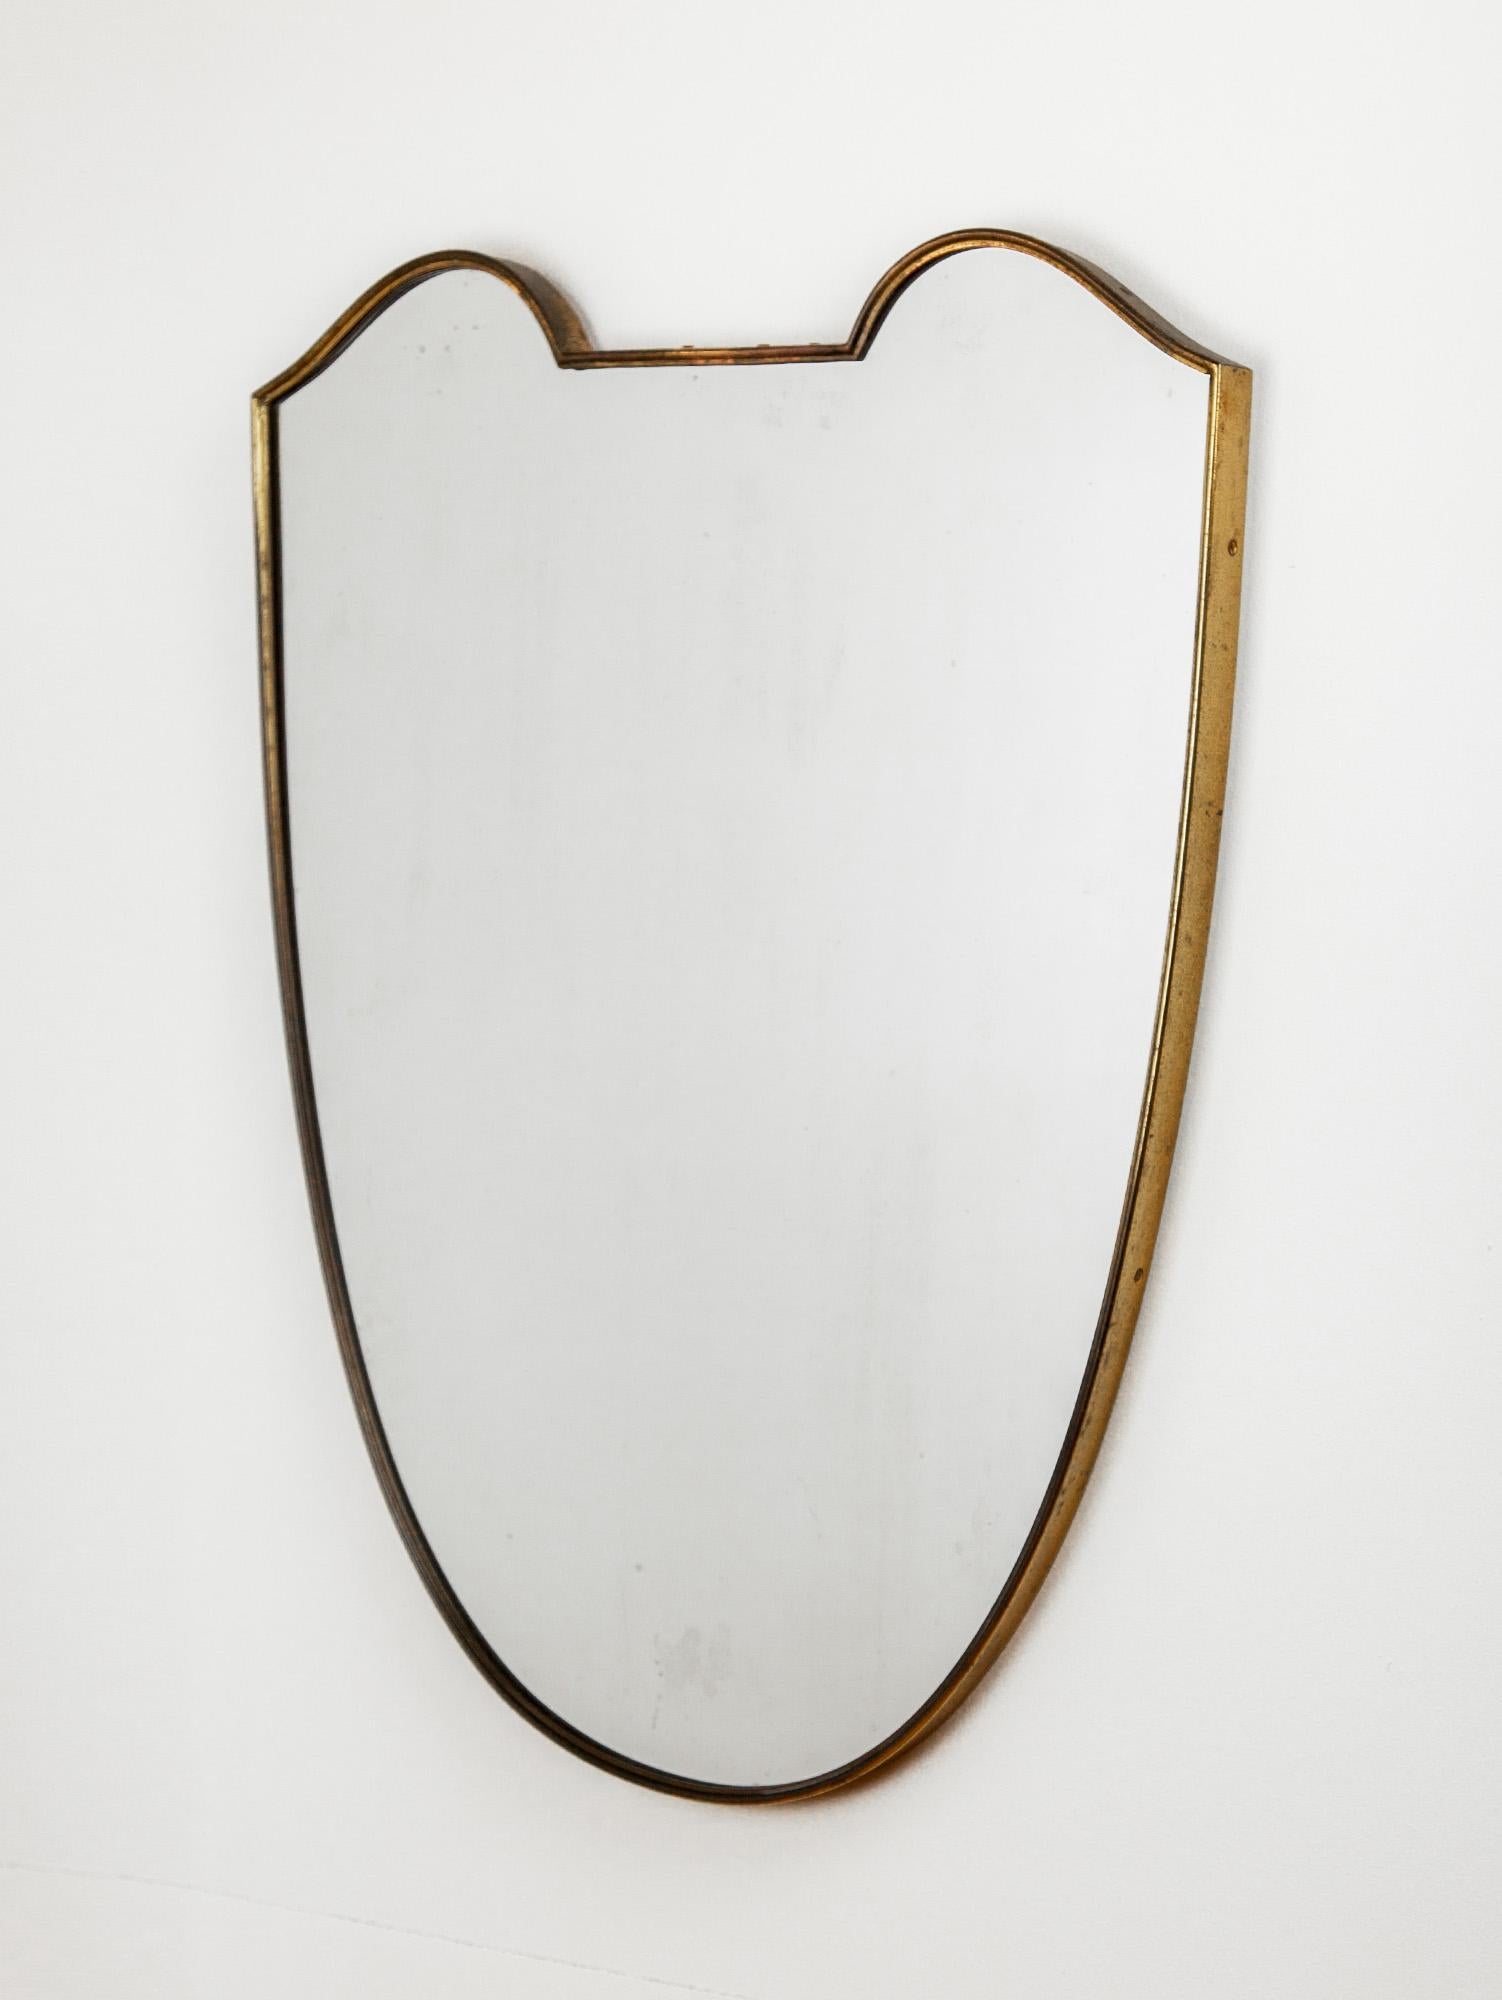 Vintage Italian brass mirror with a brass surround in the style of Gio Ponti. The classic shape epitomizes Italian modernist design. The brass frame holds the glass and wooden backing with a hidden hook on the underside. Made circa the 1950s.

Great